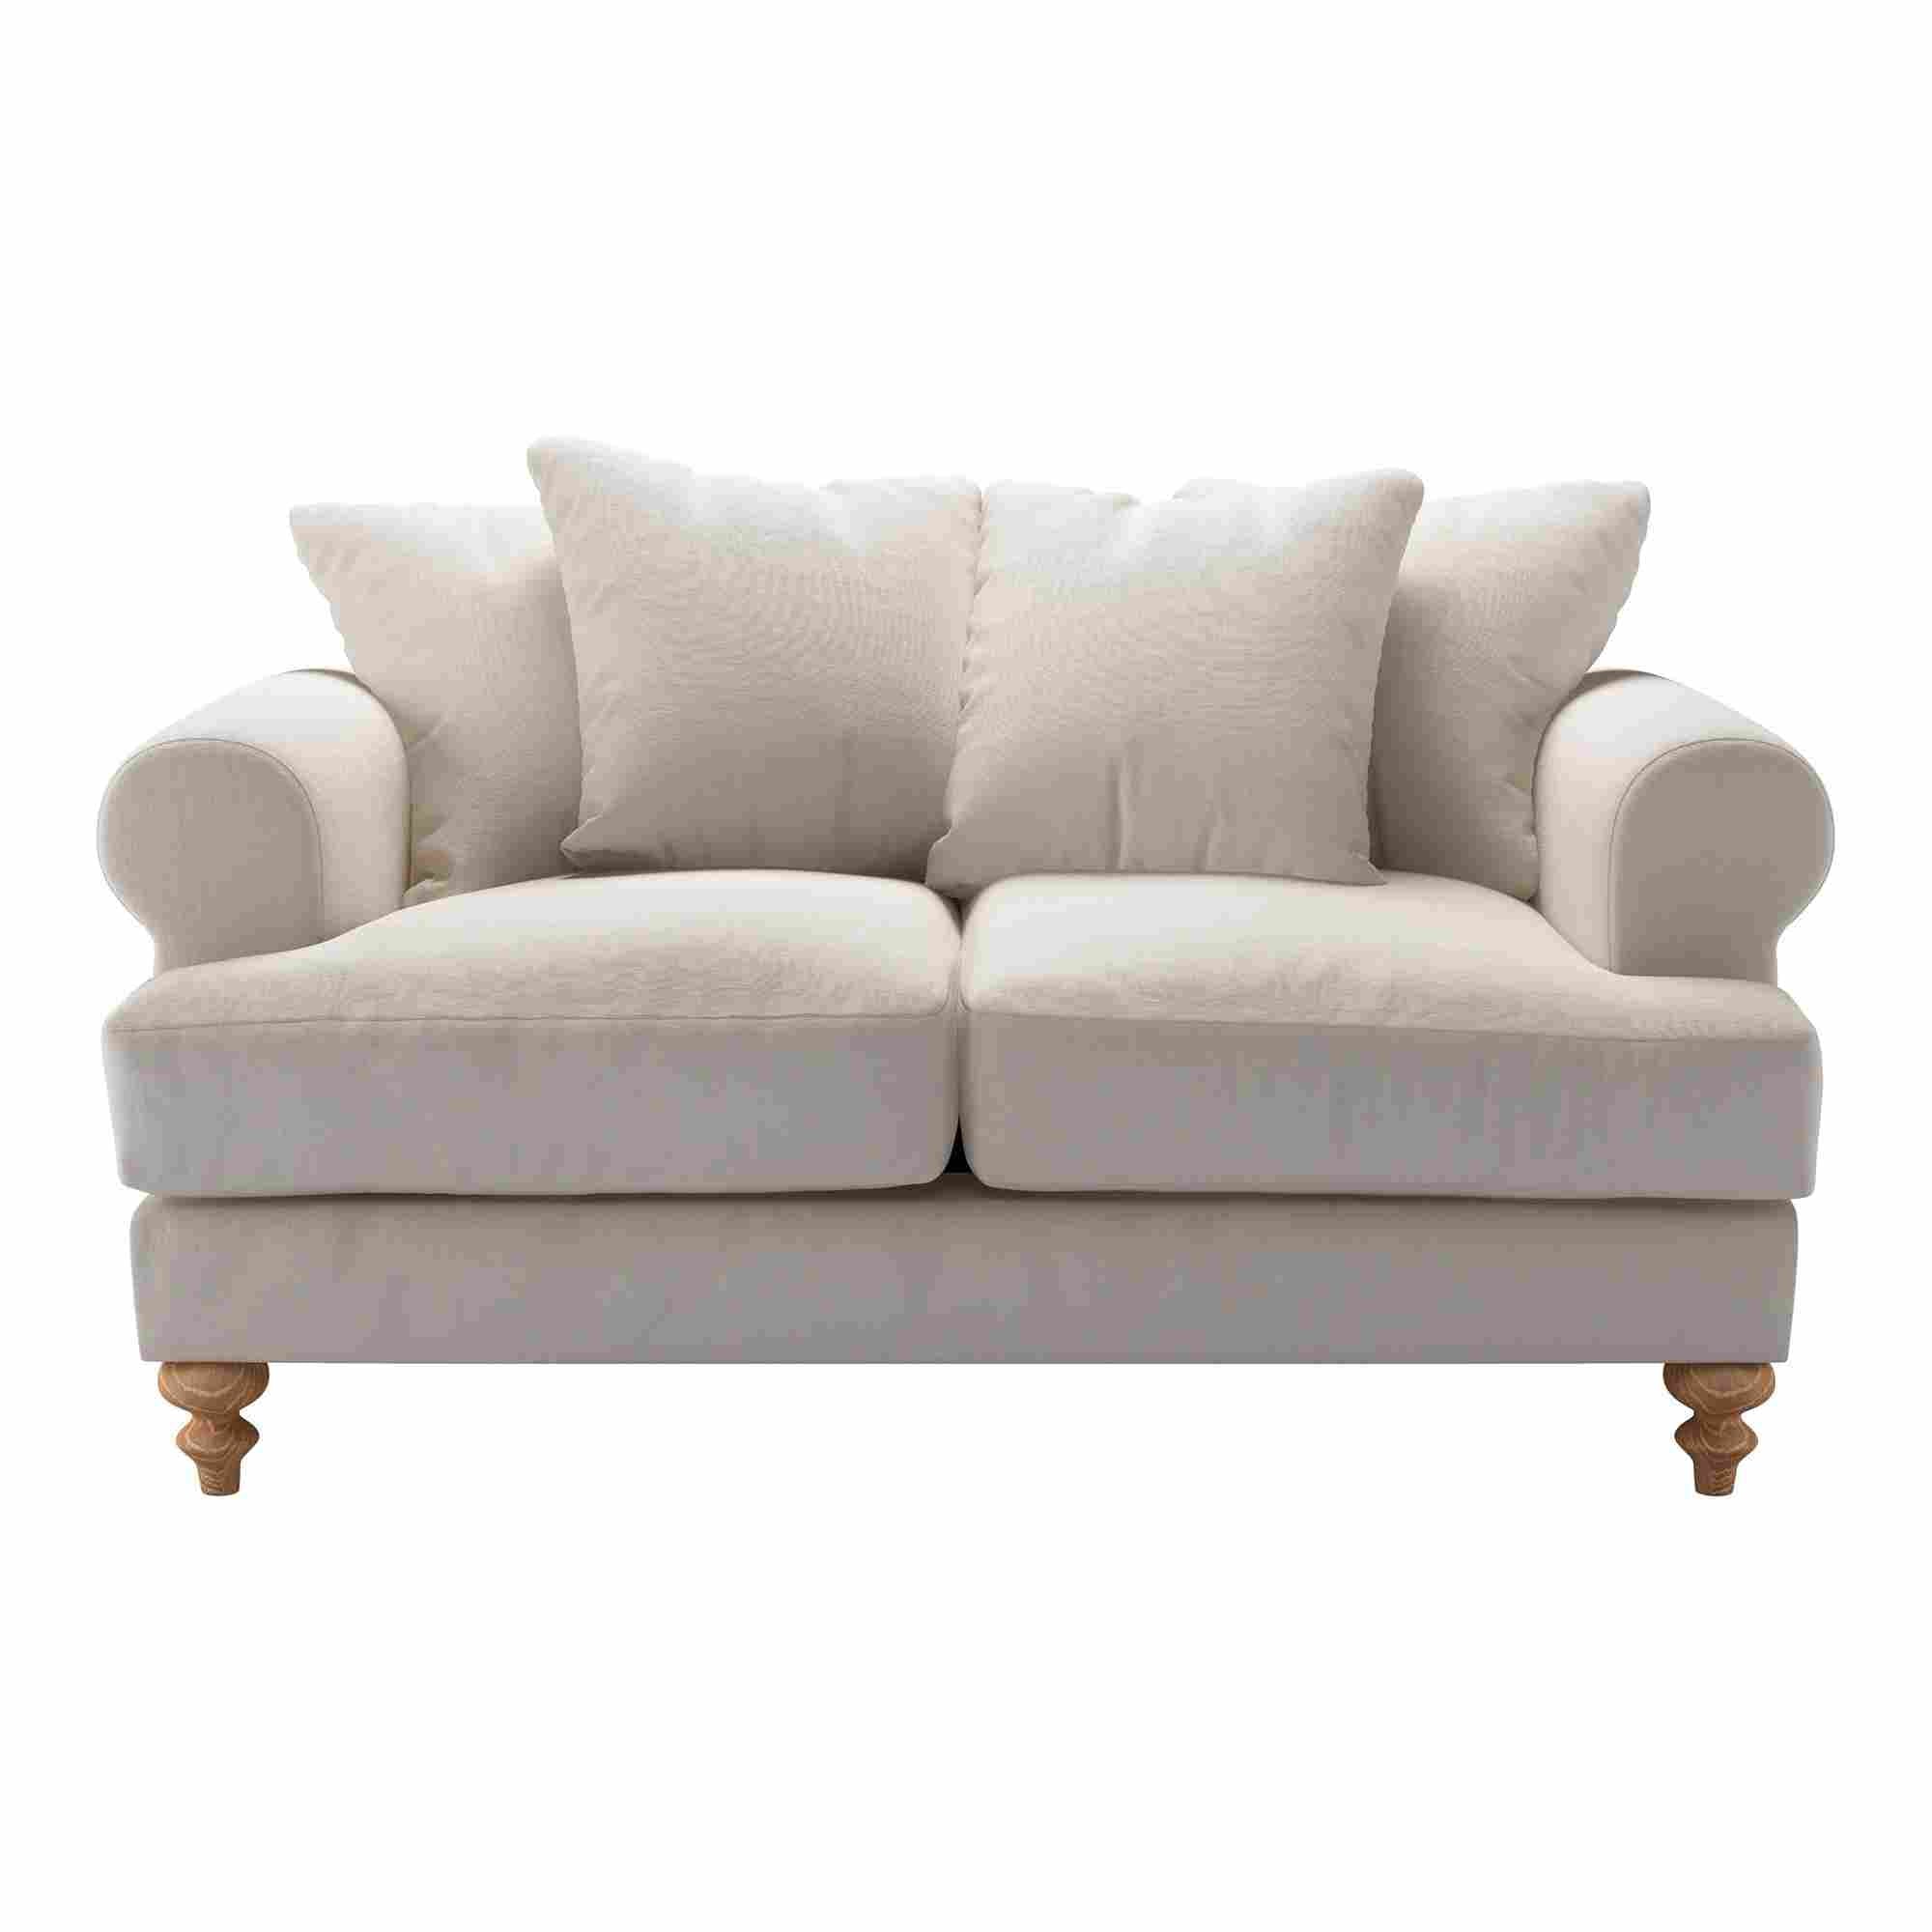 Teddy Brushed Linen Cotton Sofa - 2 Seater